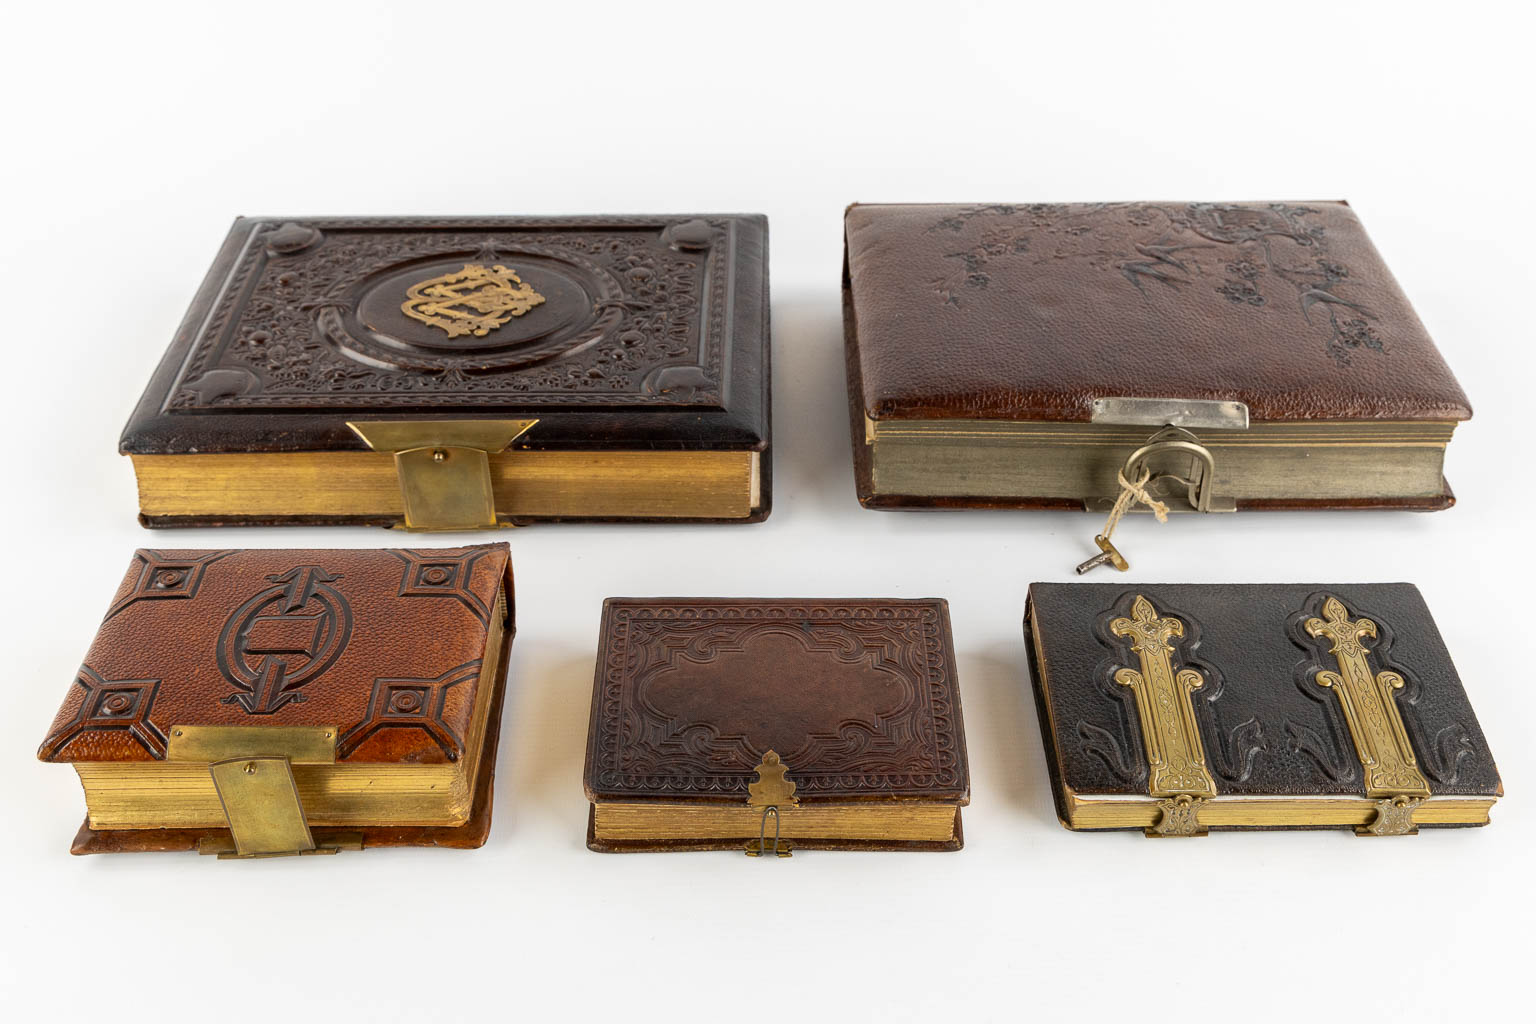 Five family photo books, of which 1 has a music box. (W:24 x H:30 cm) - Image 4 of 14